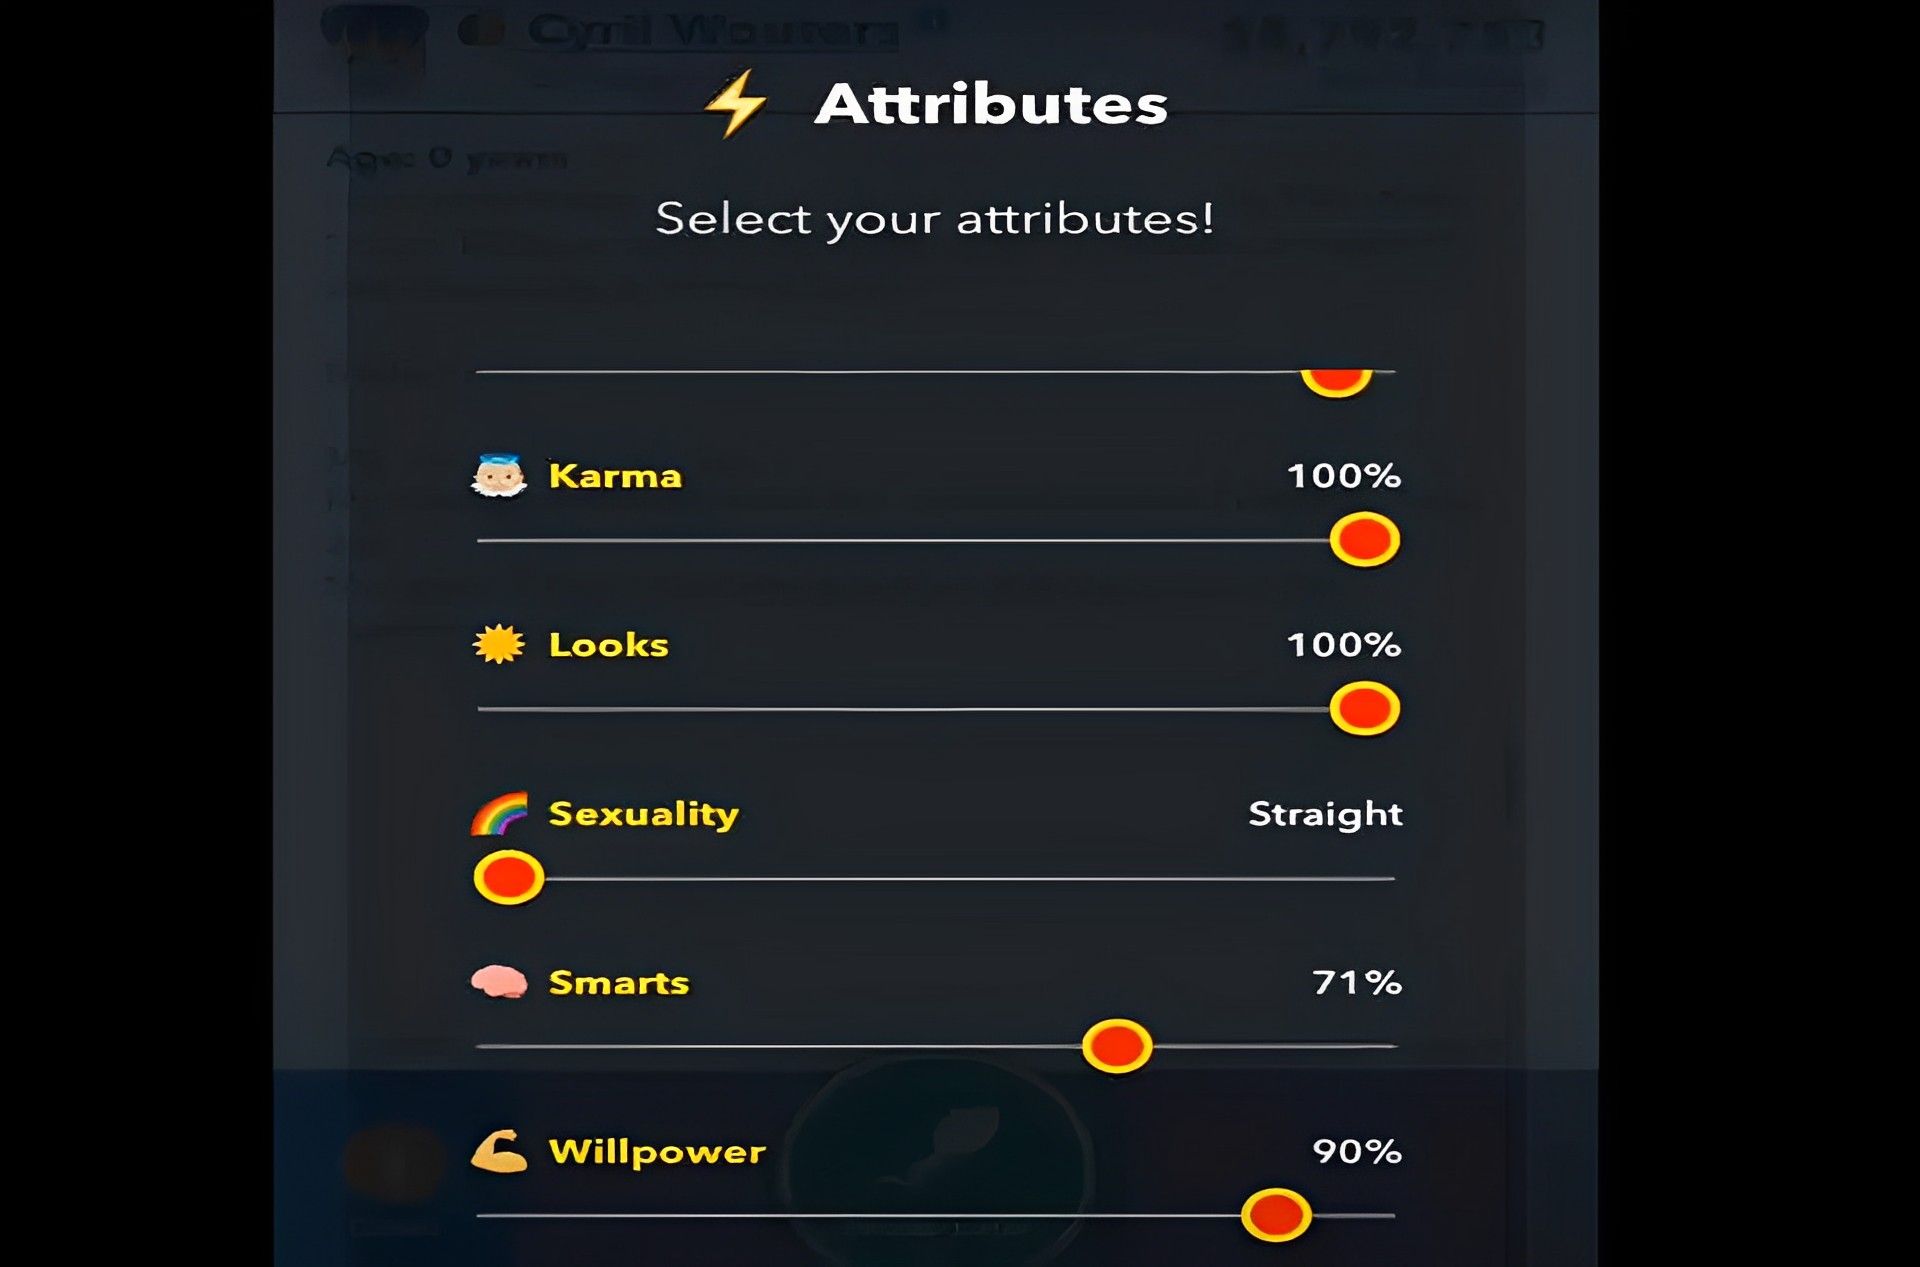 What is Willpower in BitLife